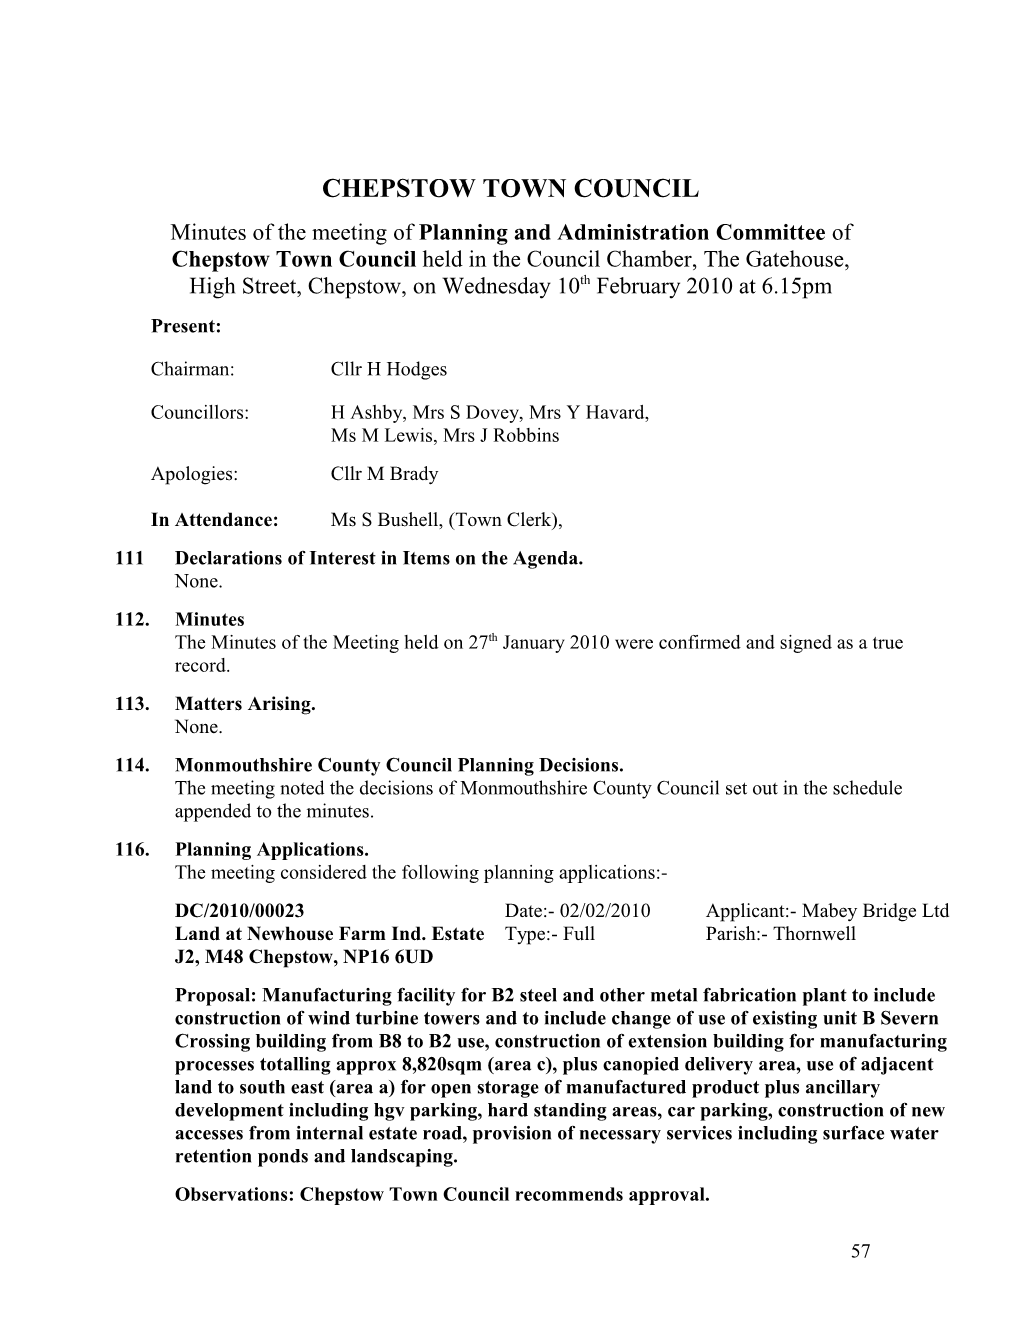 Chepstow Town Council